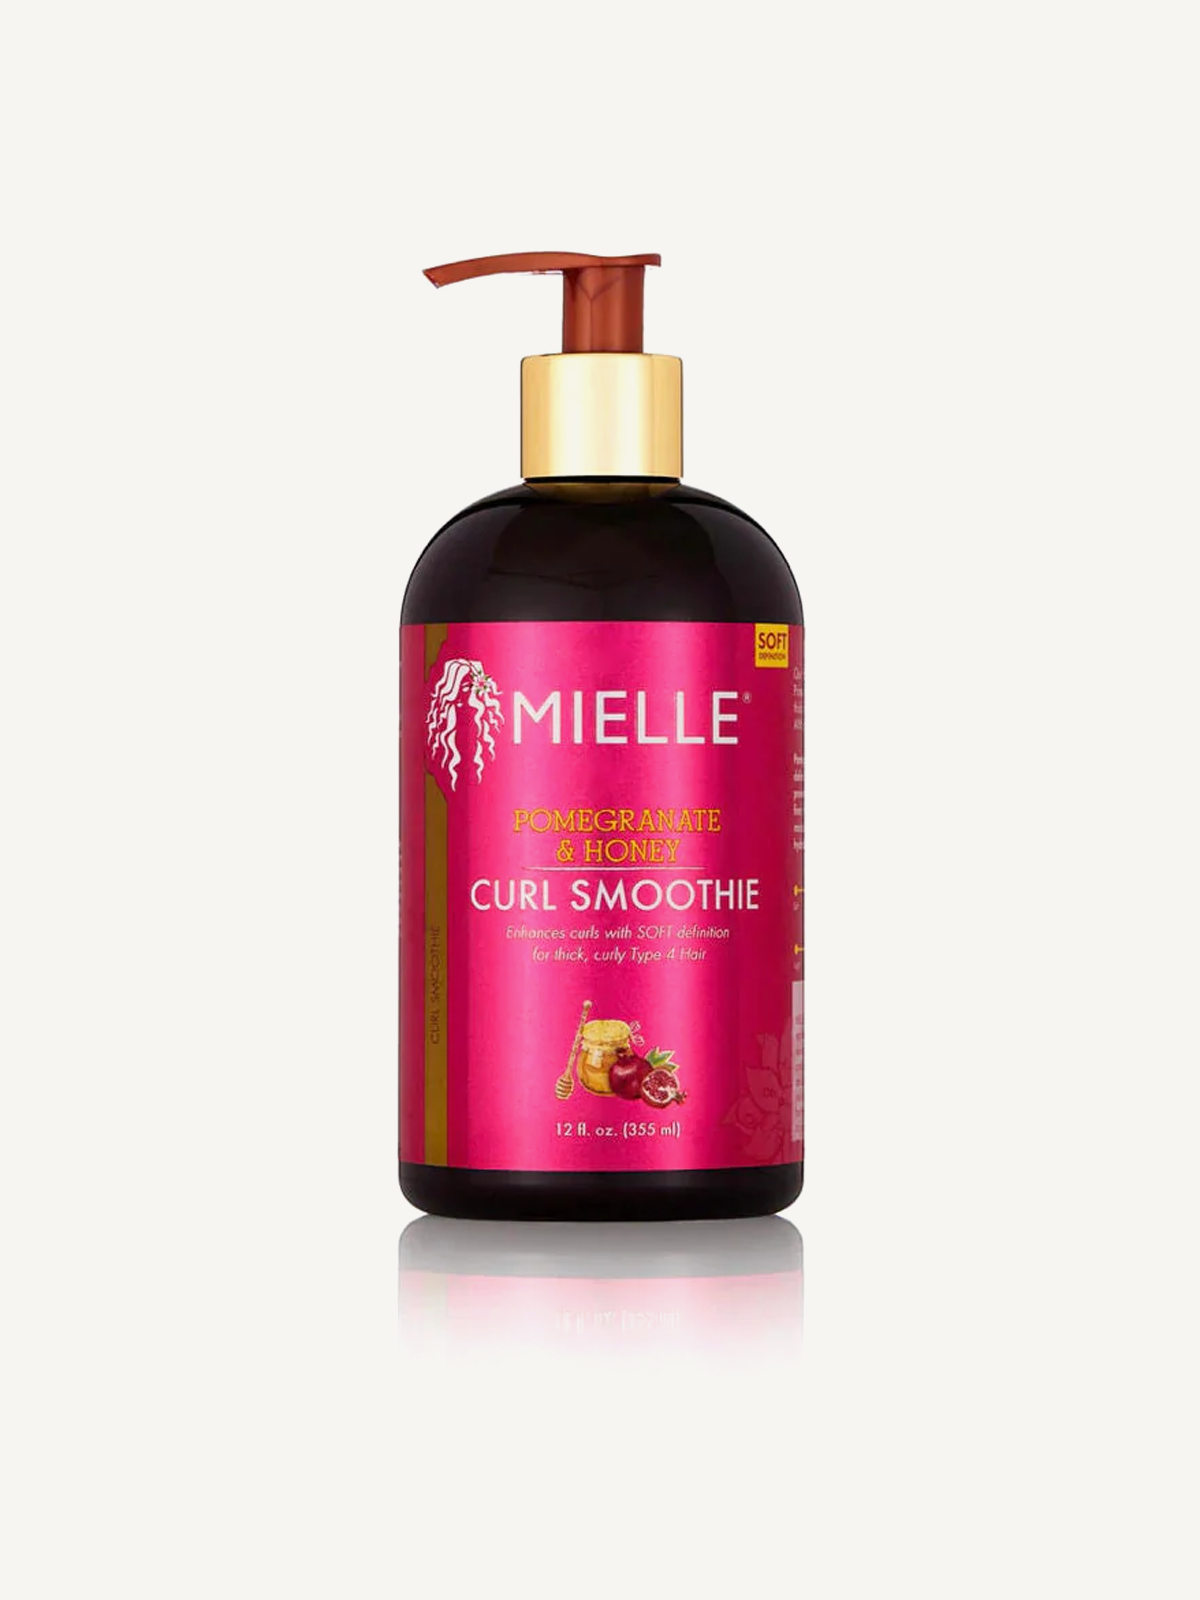 Mielle – Pomegranate & Honey Curl Smoothie